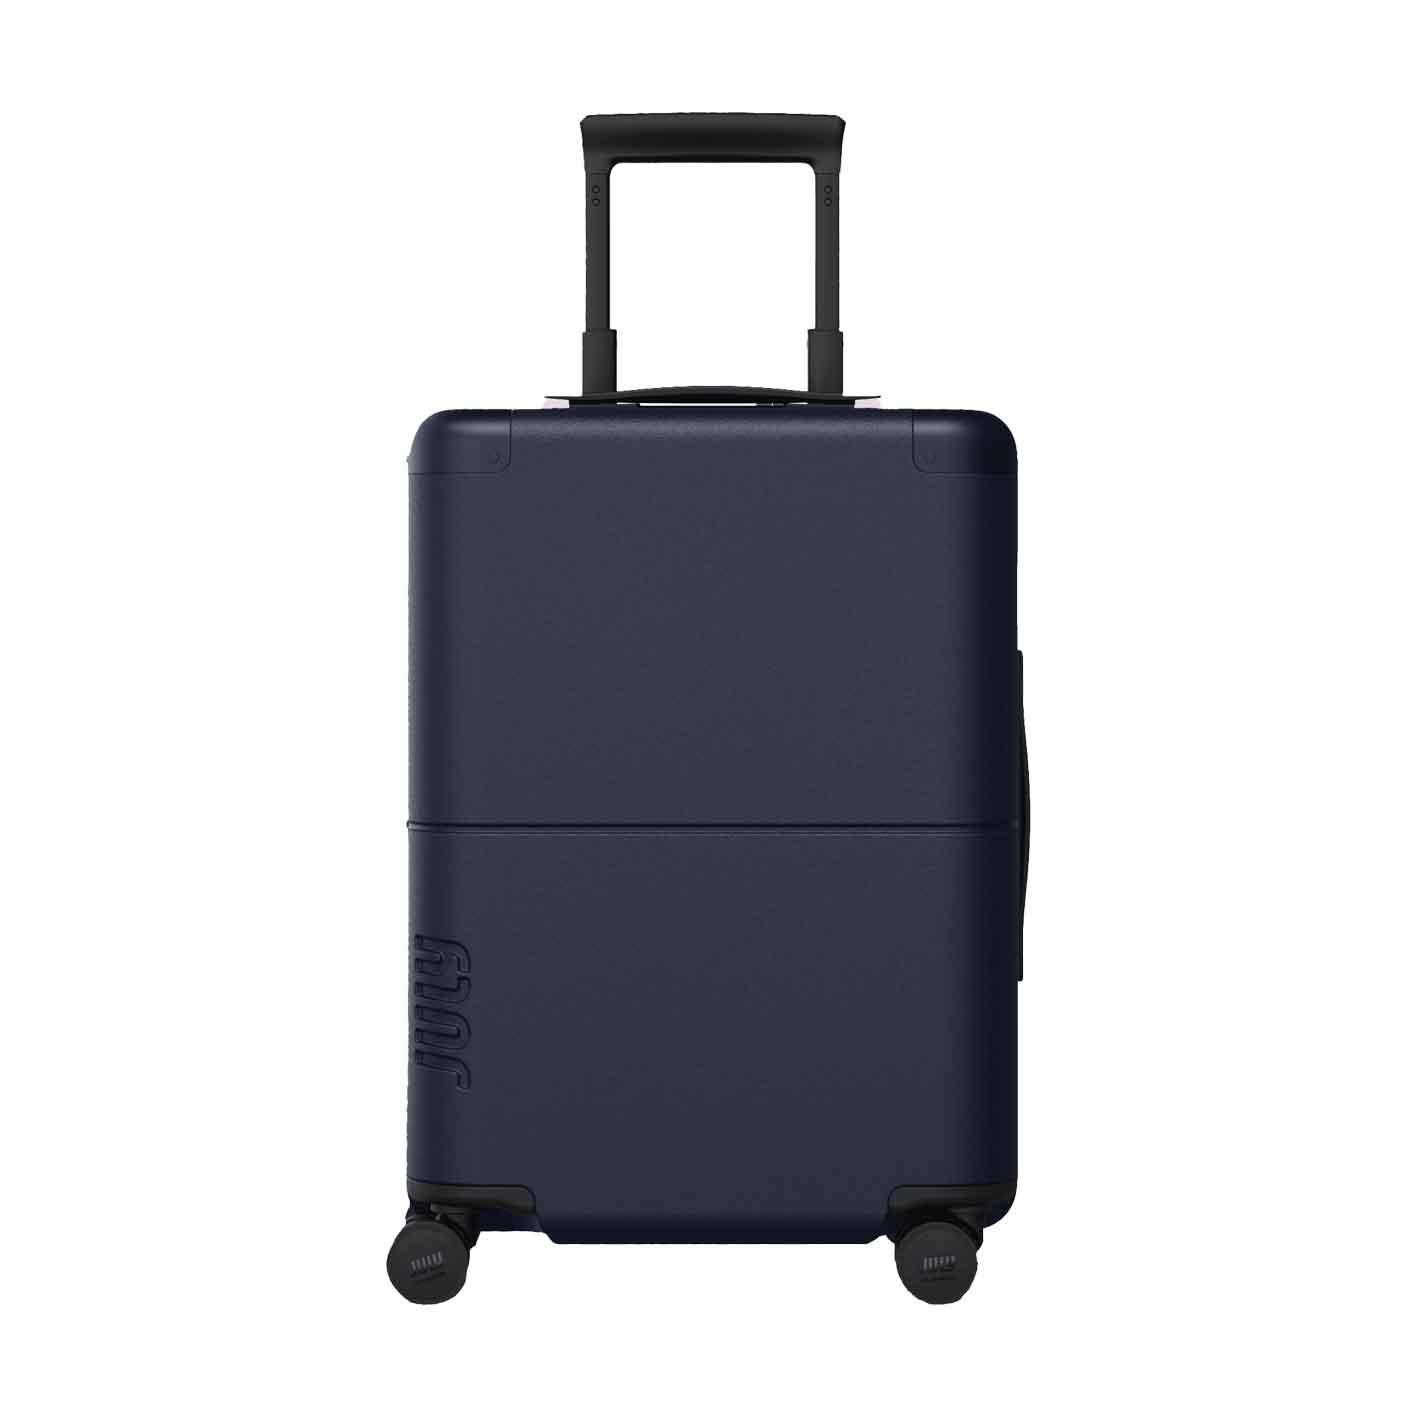 July Carry-On suitcase in navy